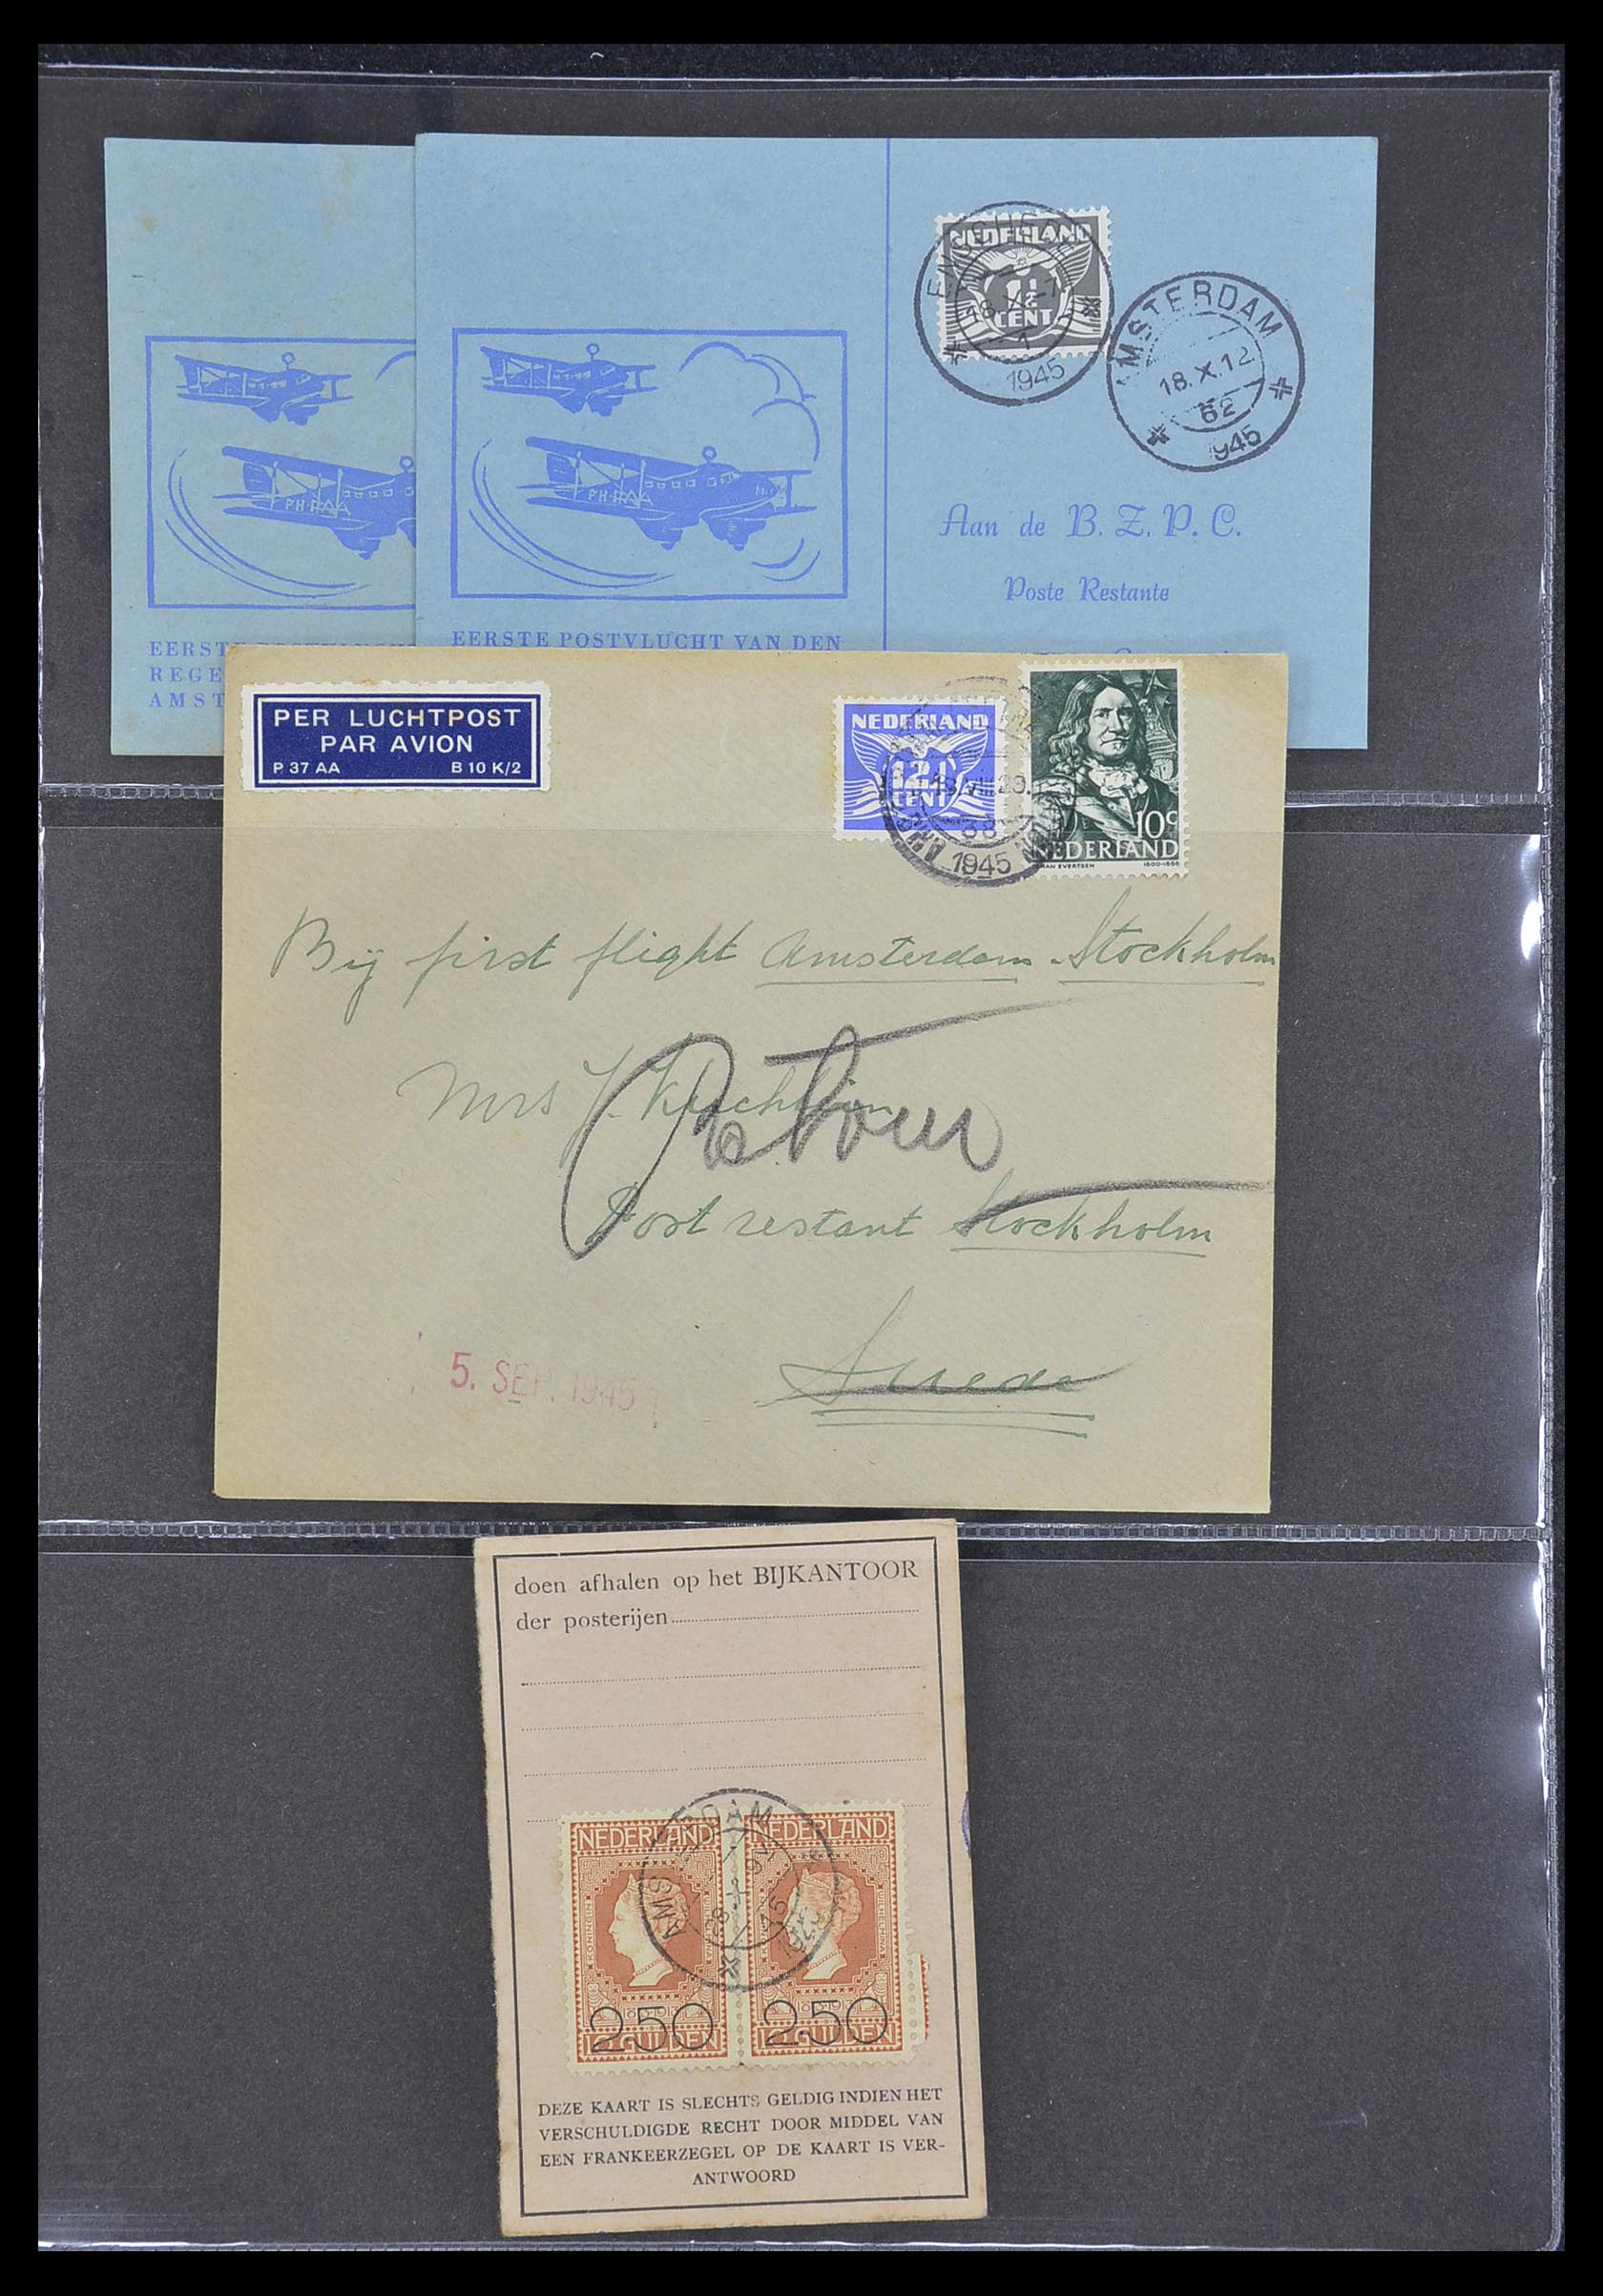 33330 161 - Stamp collection 33330 Netherlands covers 1852-1959.